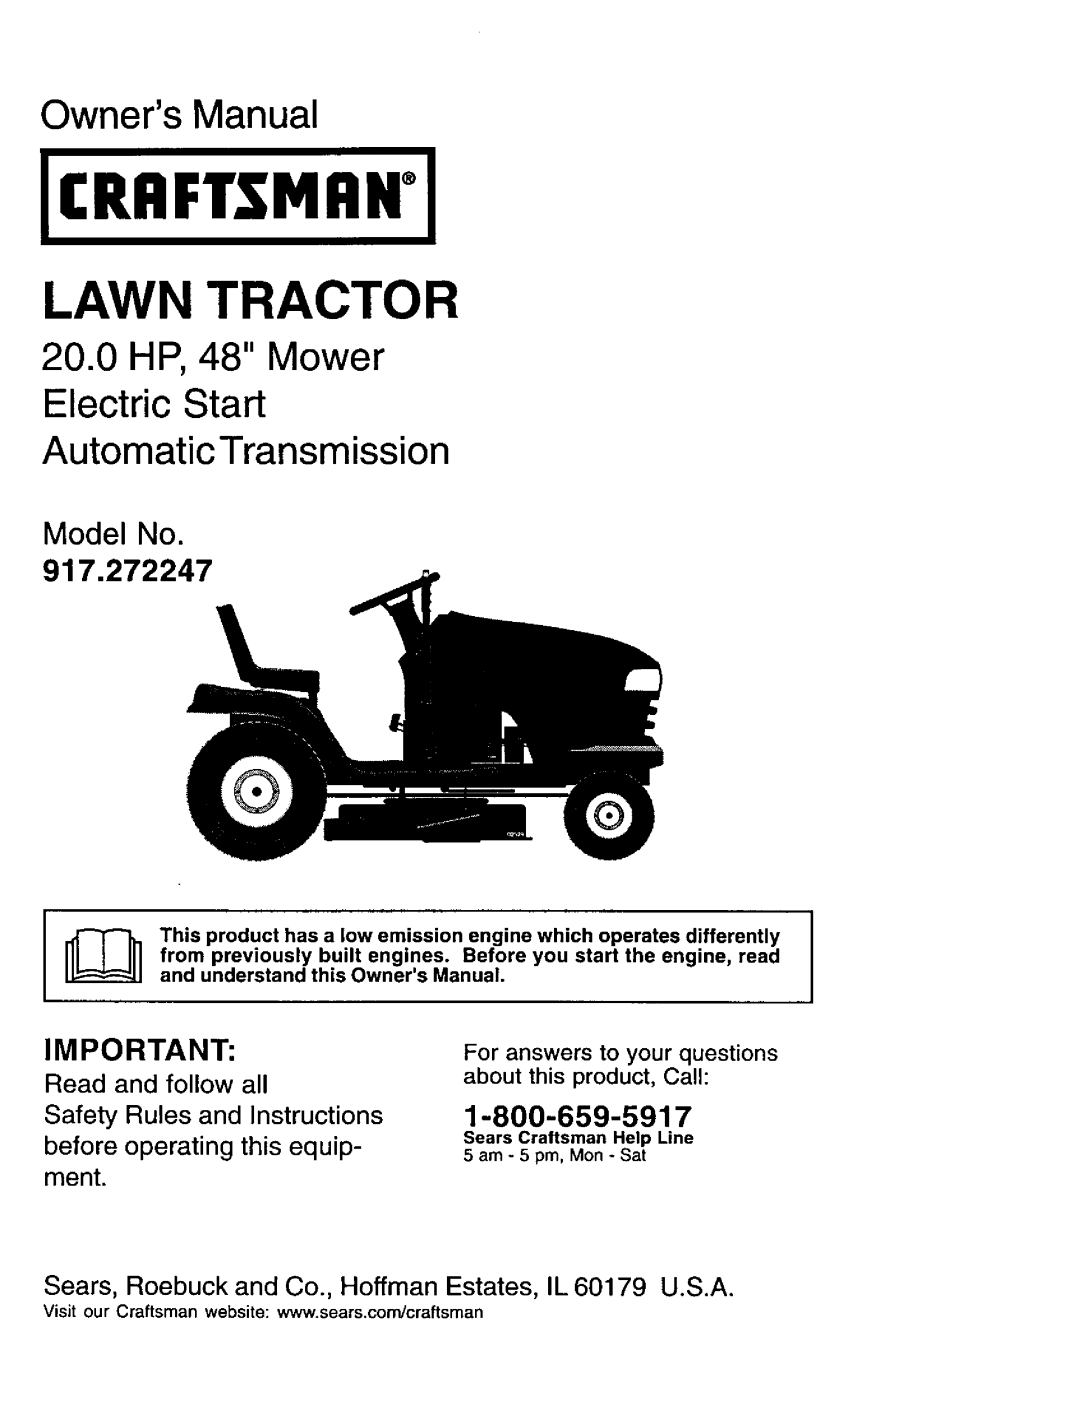 Craftsman 917.272247 owner manual Lawn Tractor, 20.0HP, 48 Mower, AutomaticTransmission, 1-800-659-5917, Jcrrftsmiiwi 